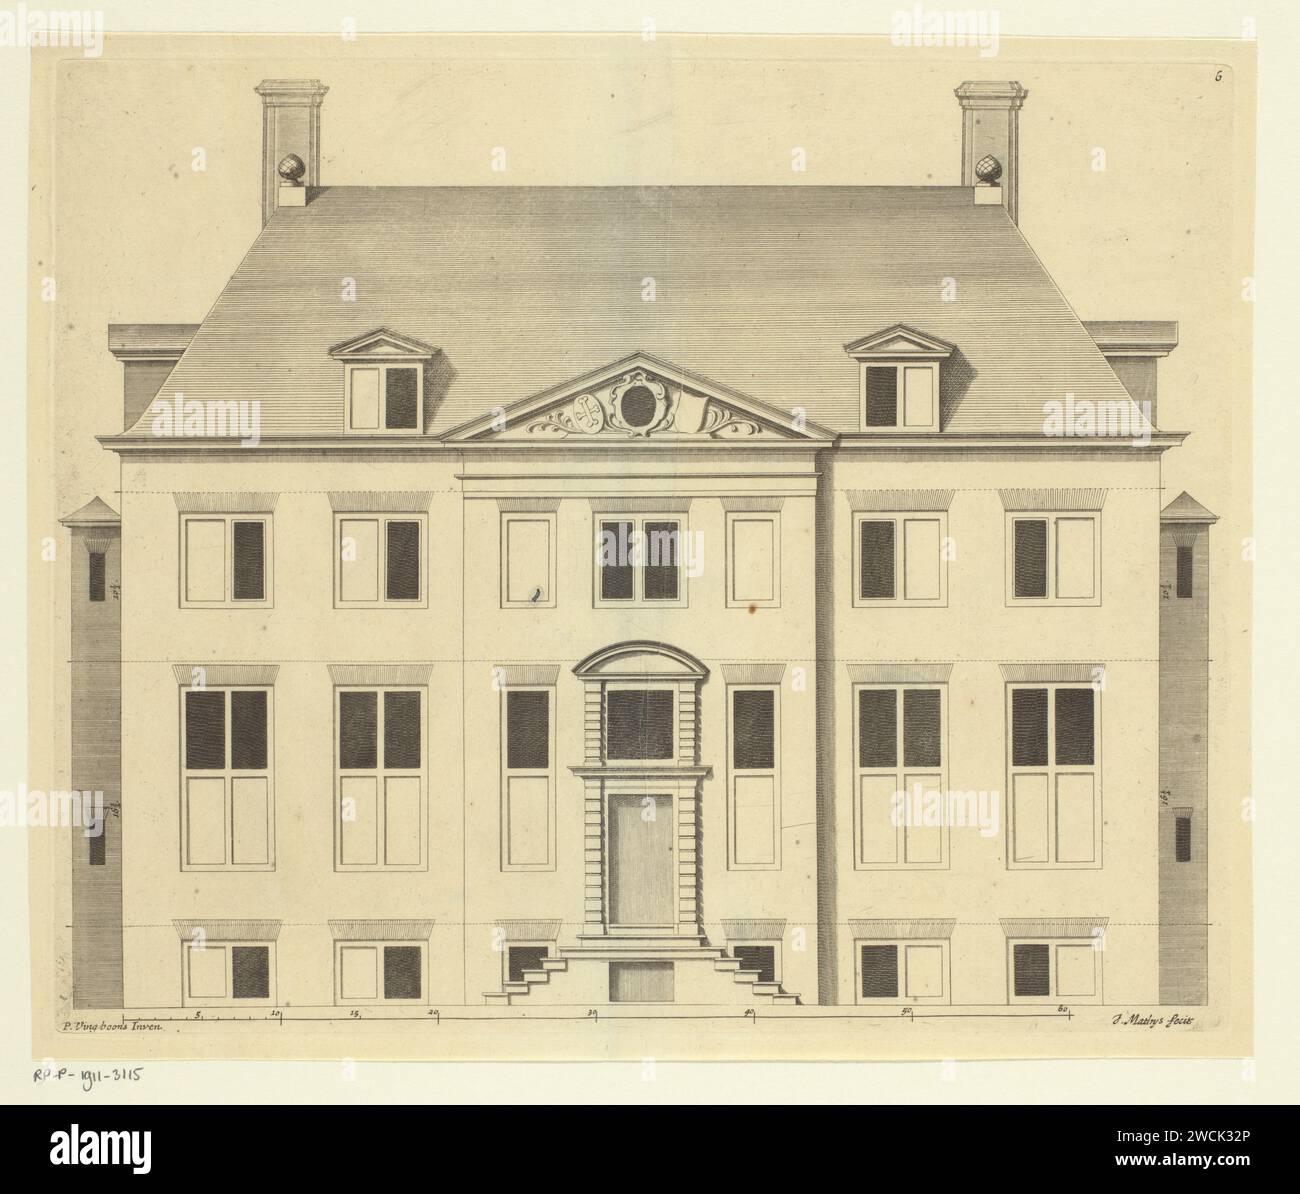 Front of a house near Diepenheim, Jan Matthysz., After Philips VinckBoons (II), 1674 print Front of a house near Diepenheim, built in 1656 for N. van den Heuvel, designed by Philips Vingboons. Amsterdam paper etching / engraving exterior  architectural design or model Stock Photo